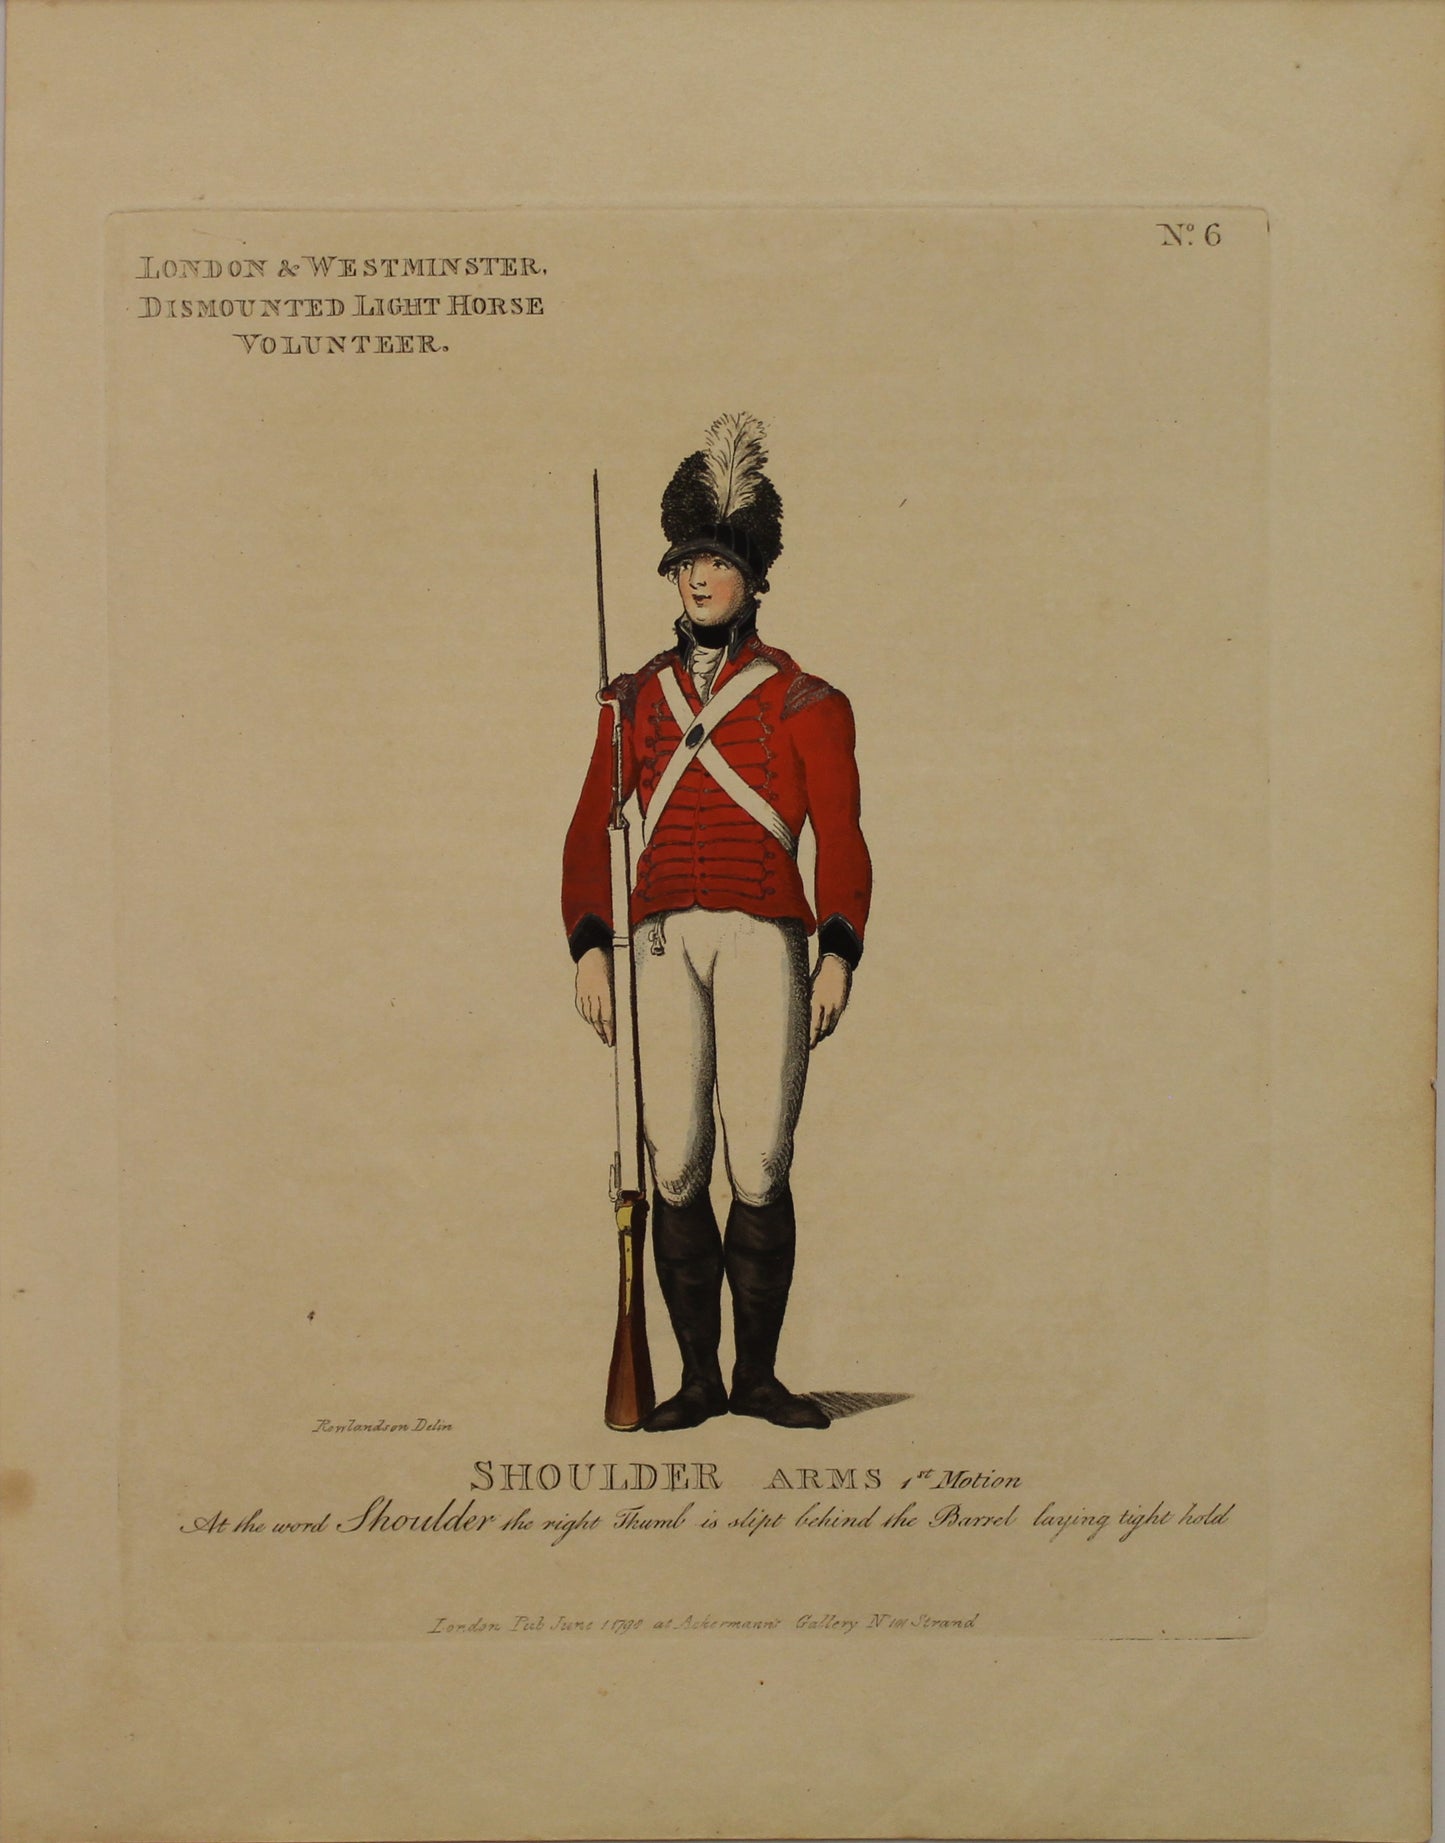 Military, Rowlandson Thomas, London and Westminster Dismounted Light Horse Volunteer, Shoulder Arms, #6, 1798